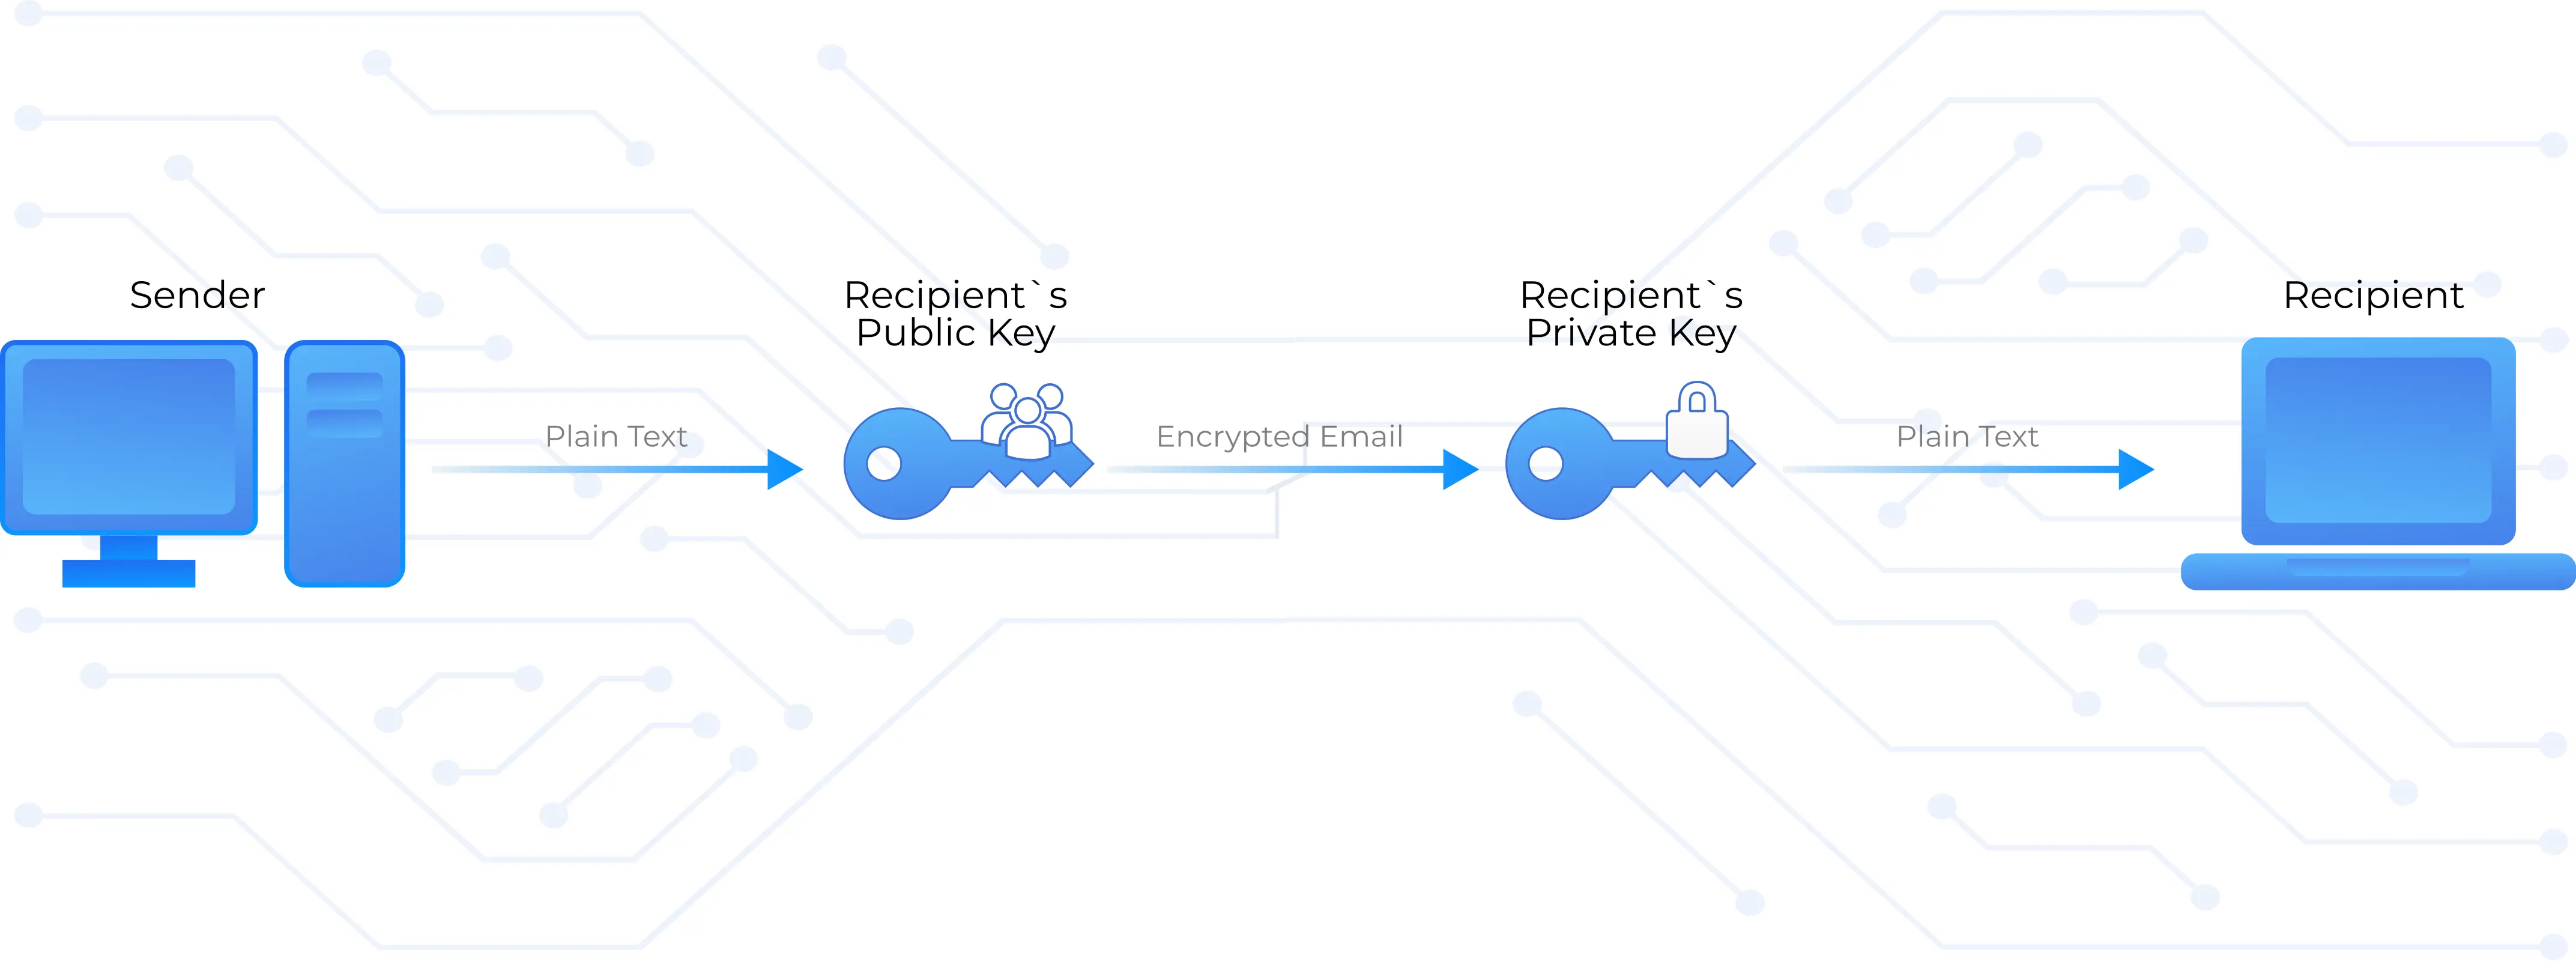 BlueMail Features SMIME: An end-to-end secure layer of email encryption